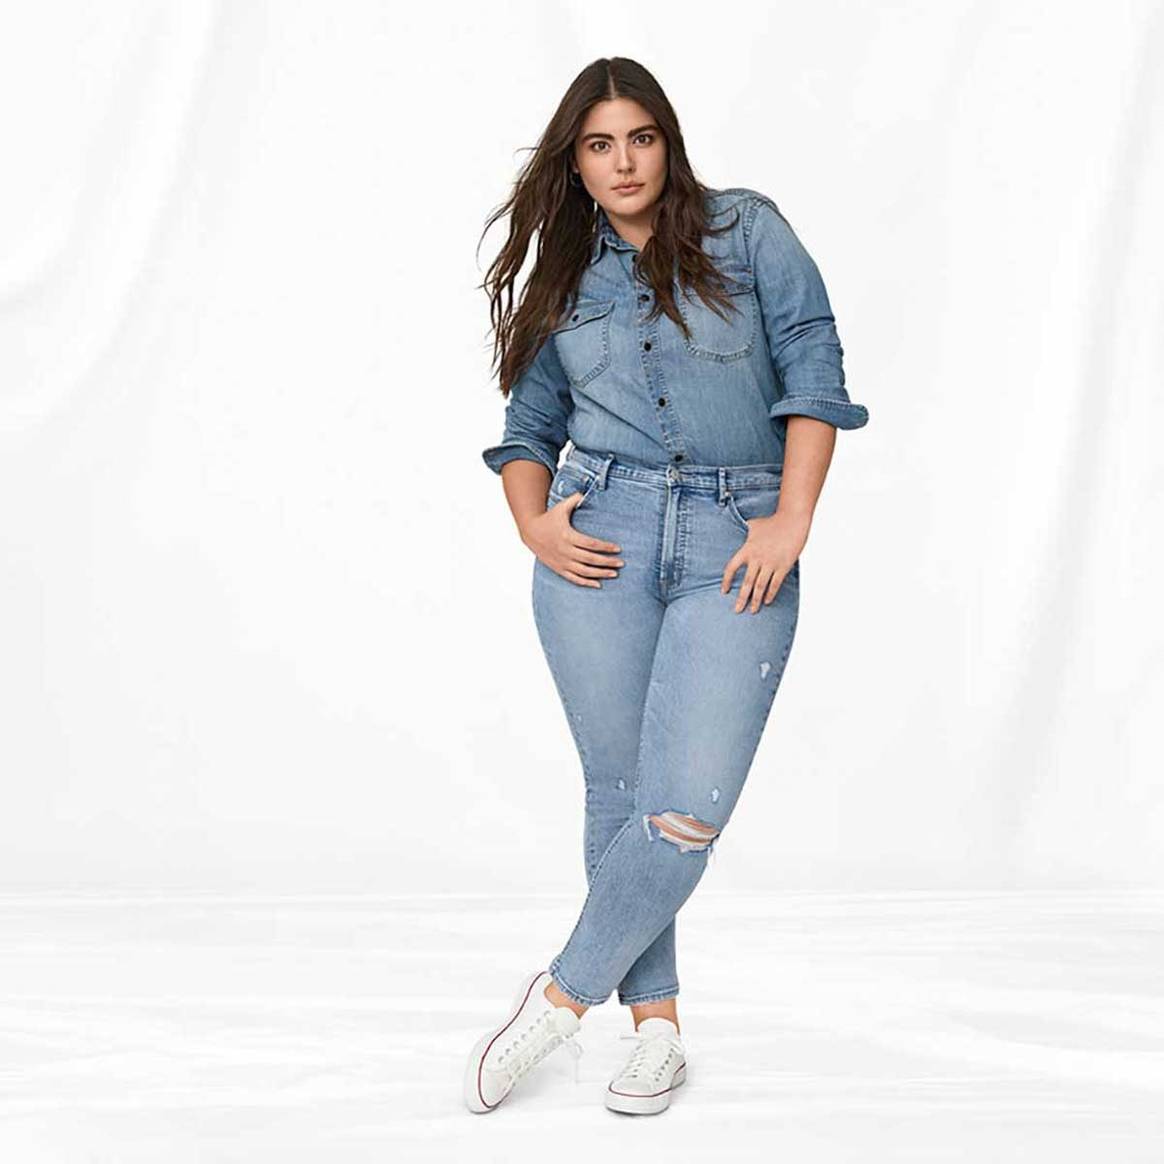 In Pictures: Gap highlights inclusivity with latest campaign